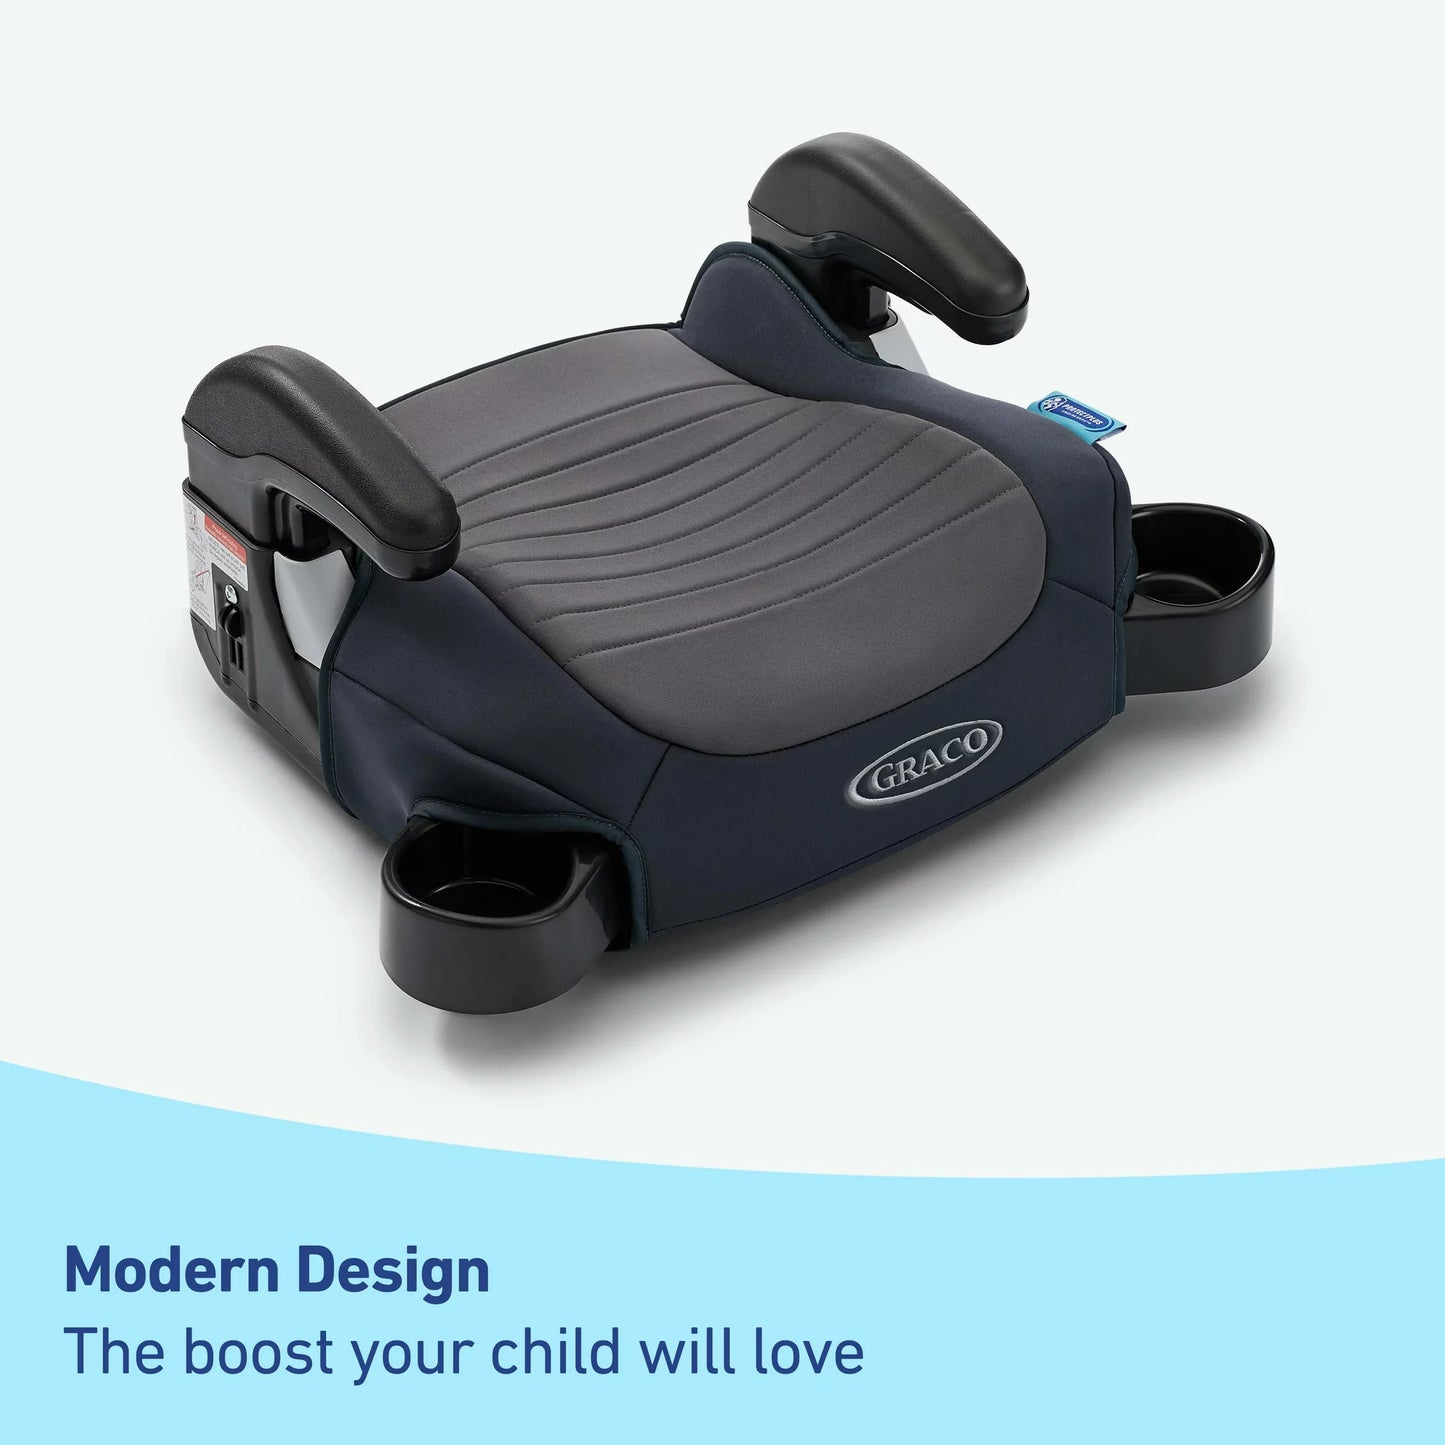 New Graco Booster Seat Turbobooster 2.0 - Kent